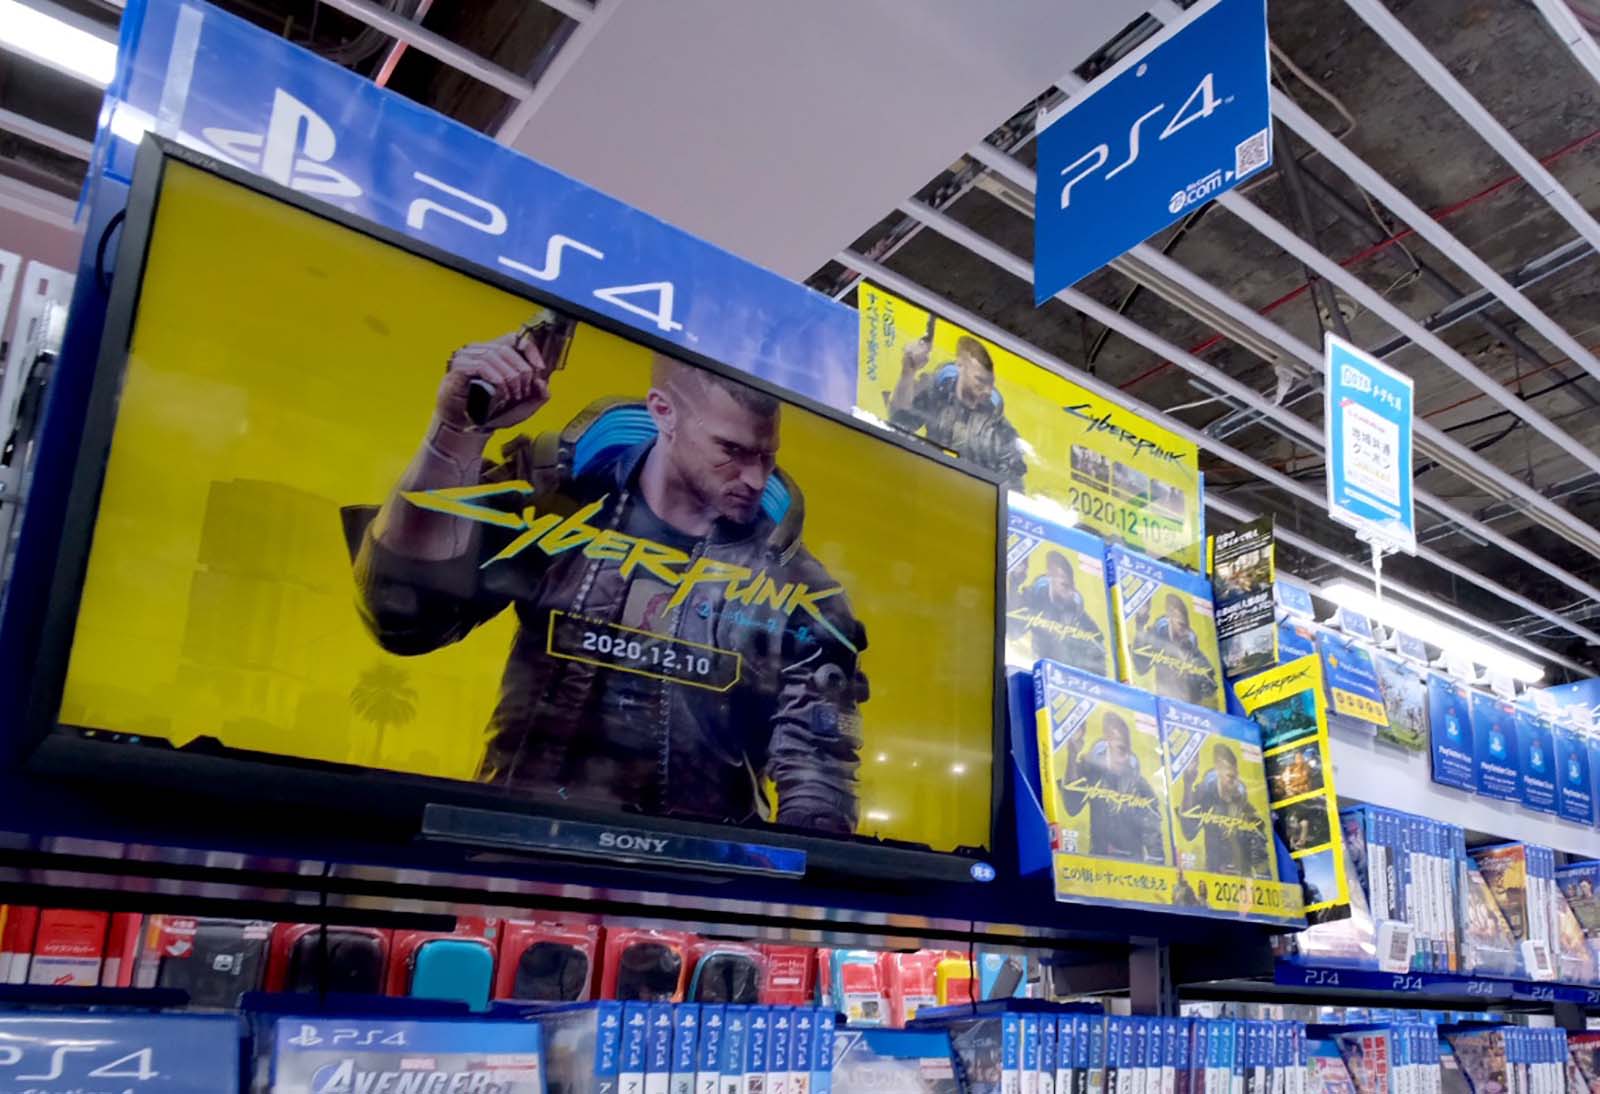 Cyberpunk 2077 is now back on the PlayStation Store! - Home of the